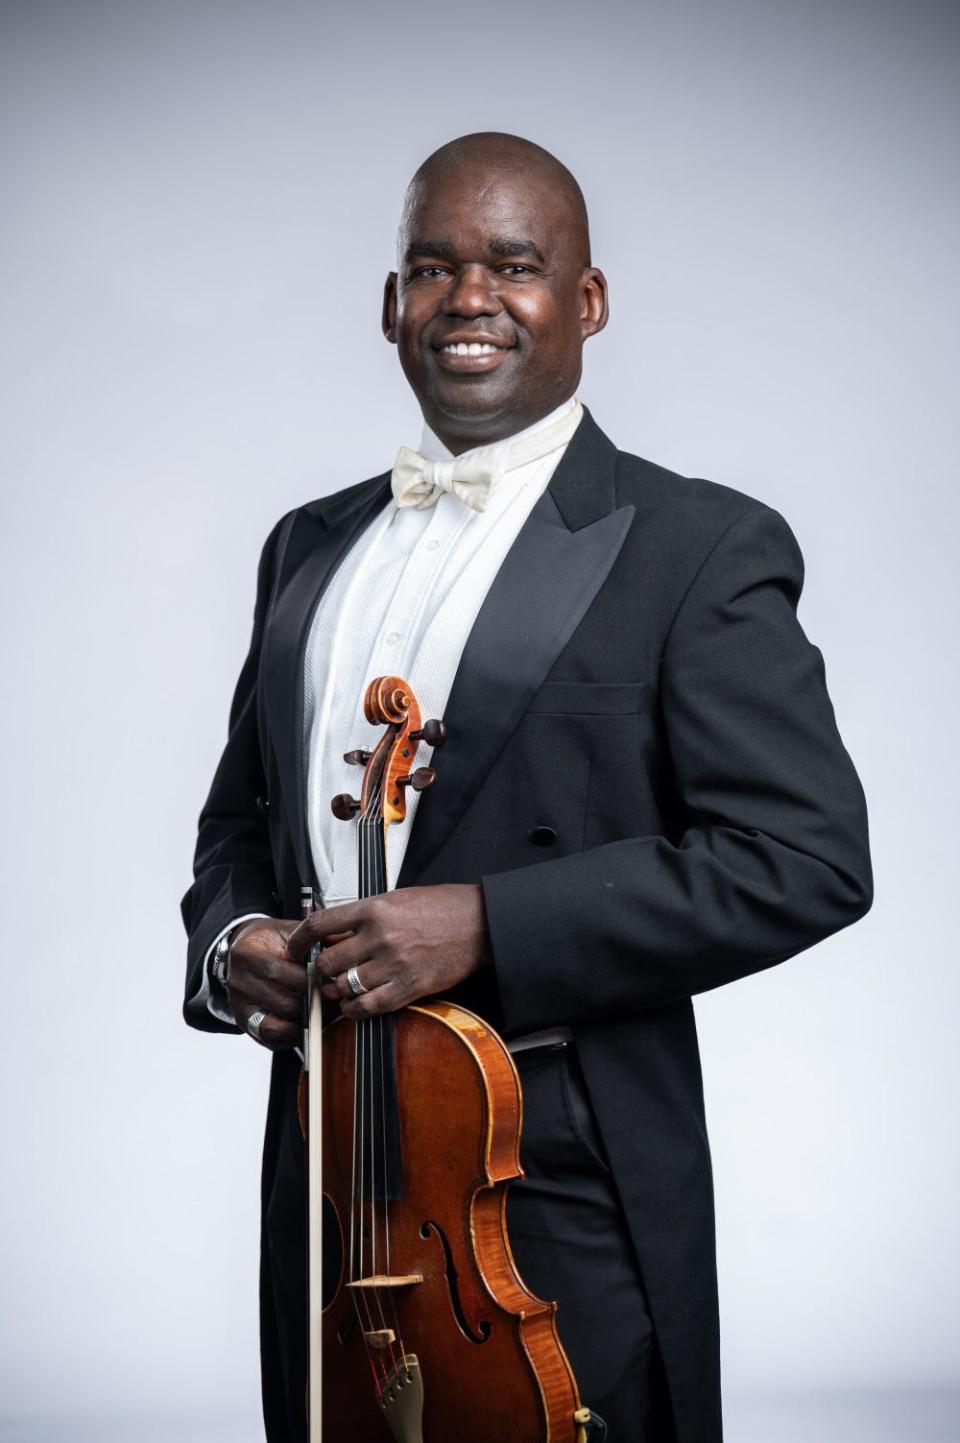 Derek Reeves, the principal violist for the Fort Wayne Philharmonic, performs Nov. 5, 2023, as the guest soloist for the Elkhart County Symphony at Goshen College’s Music Center.